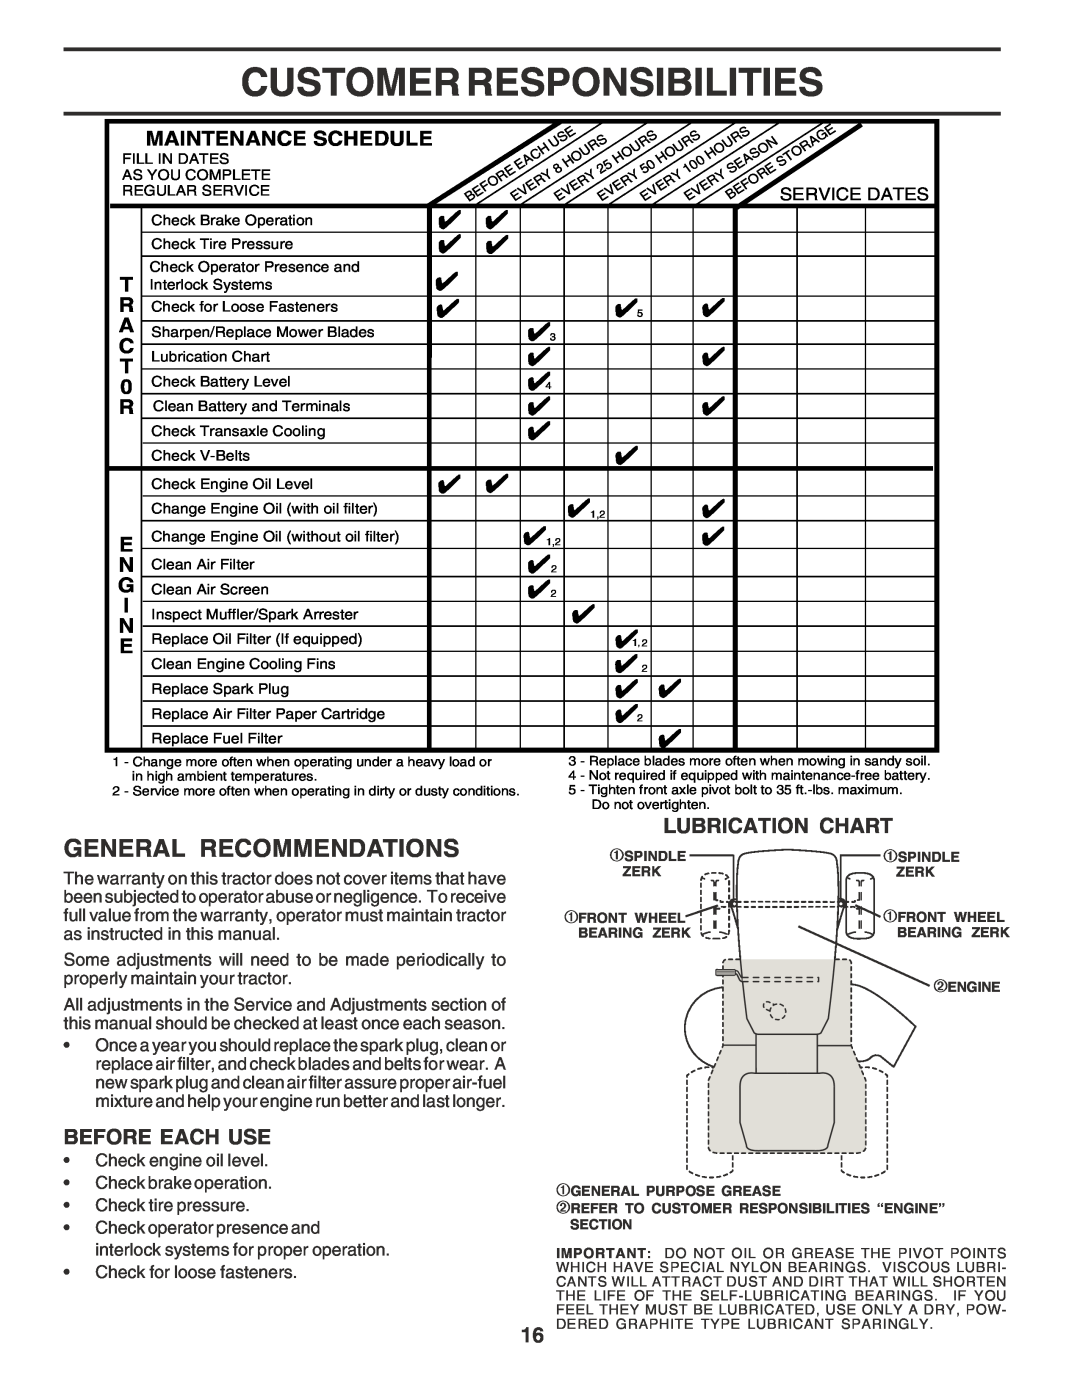 Poulan PR185H42STG owner manual Customer Responsibilities, General Recommendations, Lubrication Chart, Before Each Use 